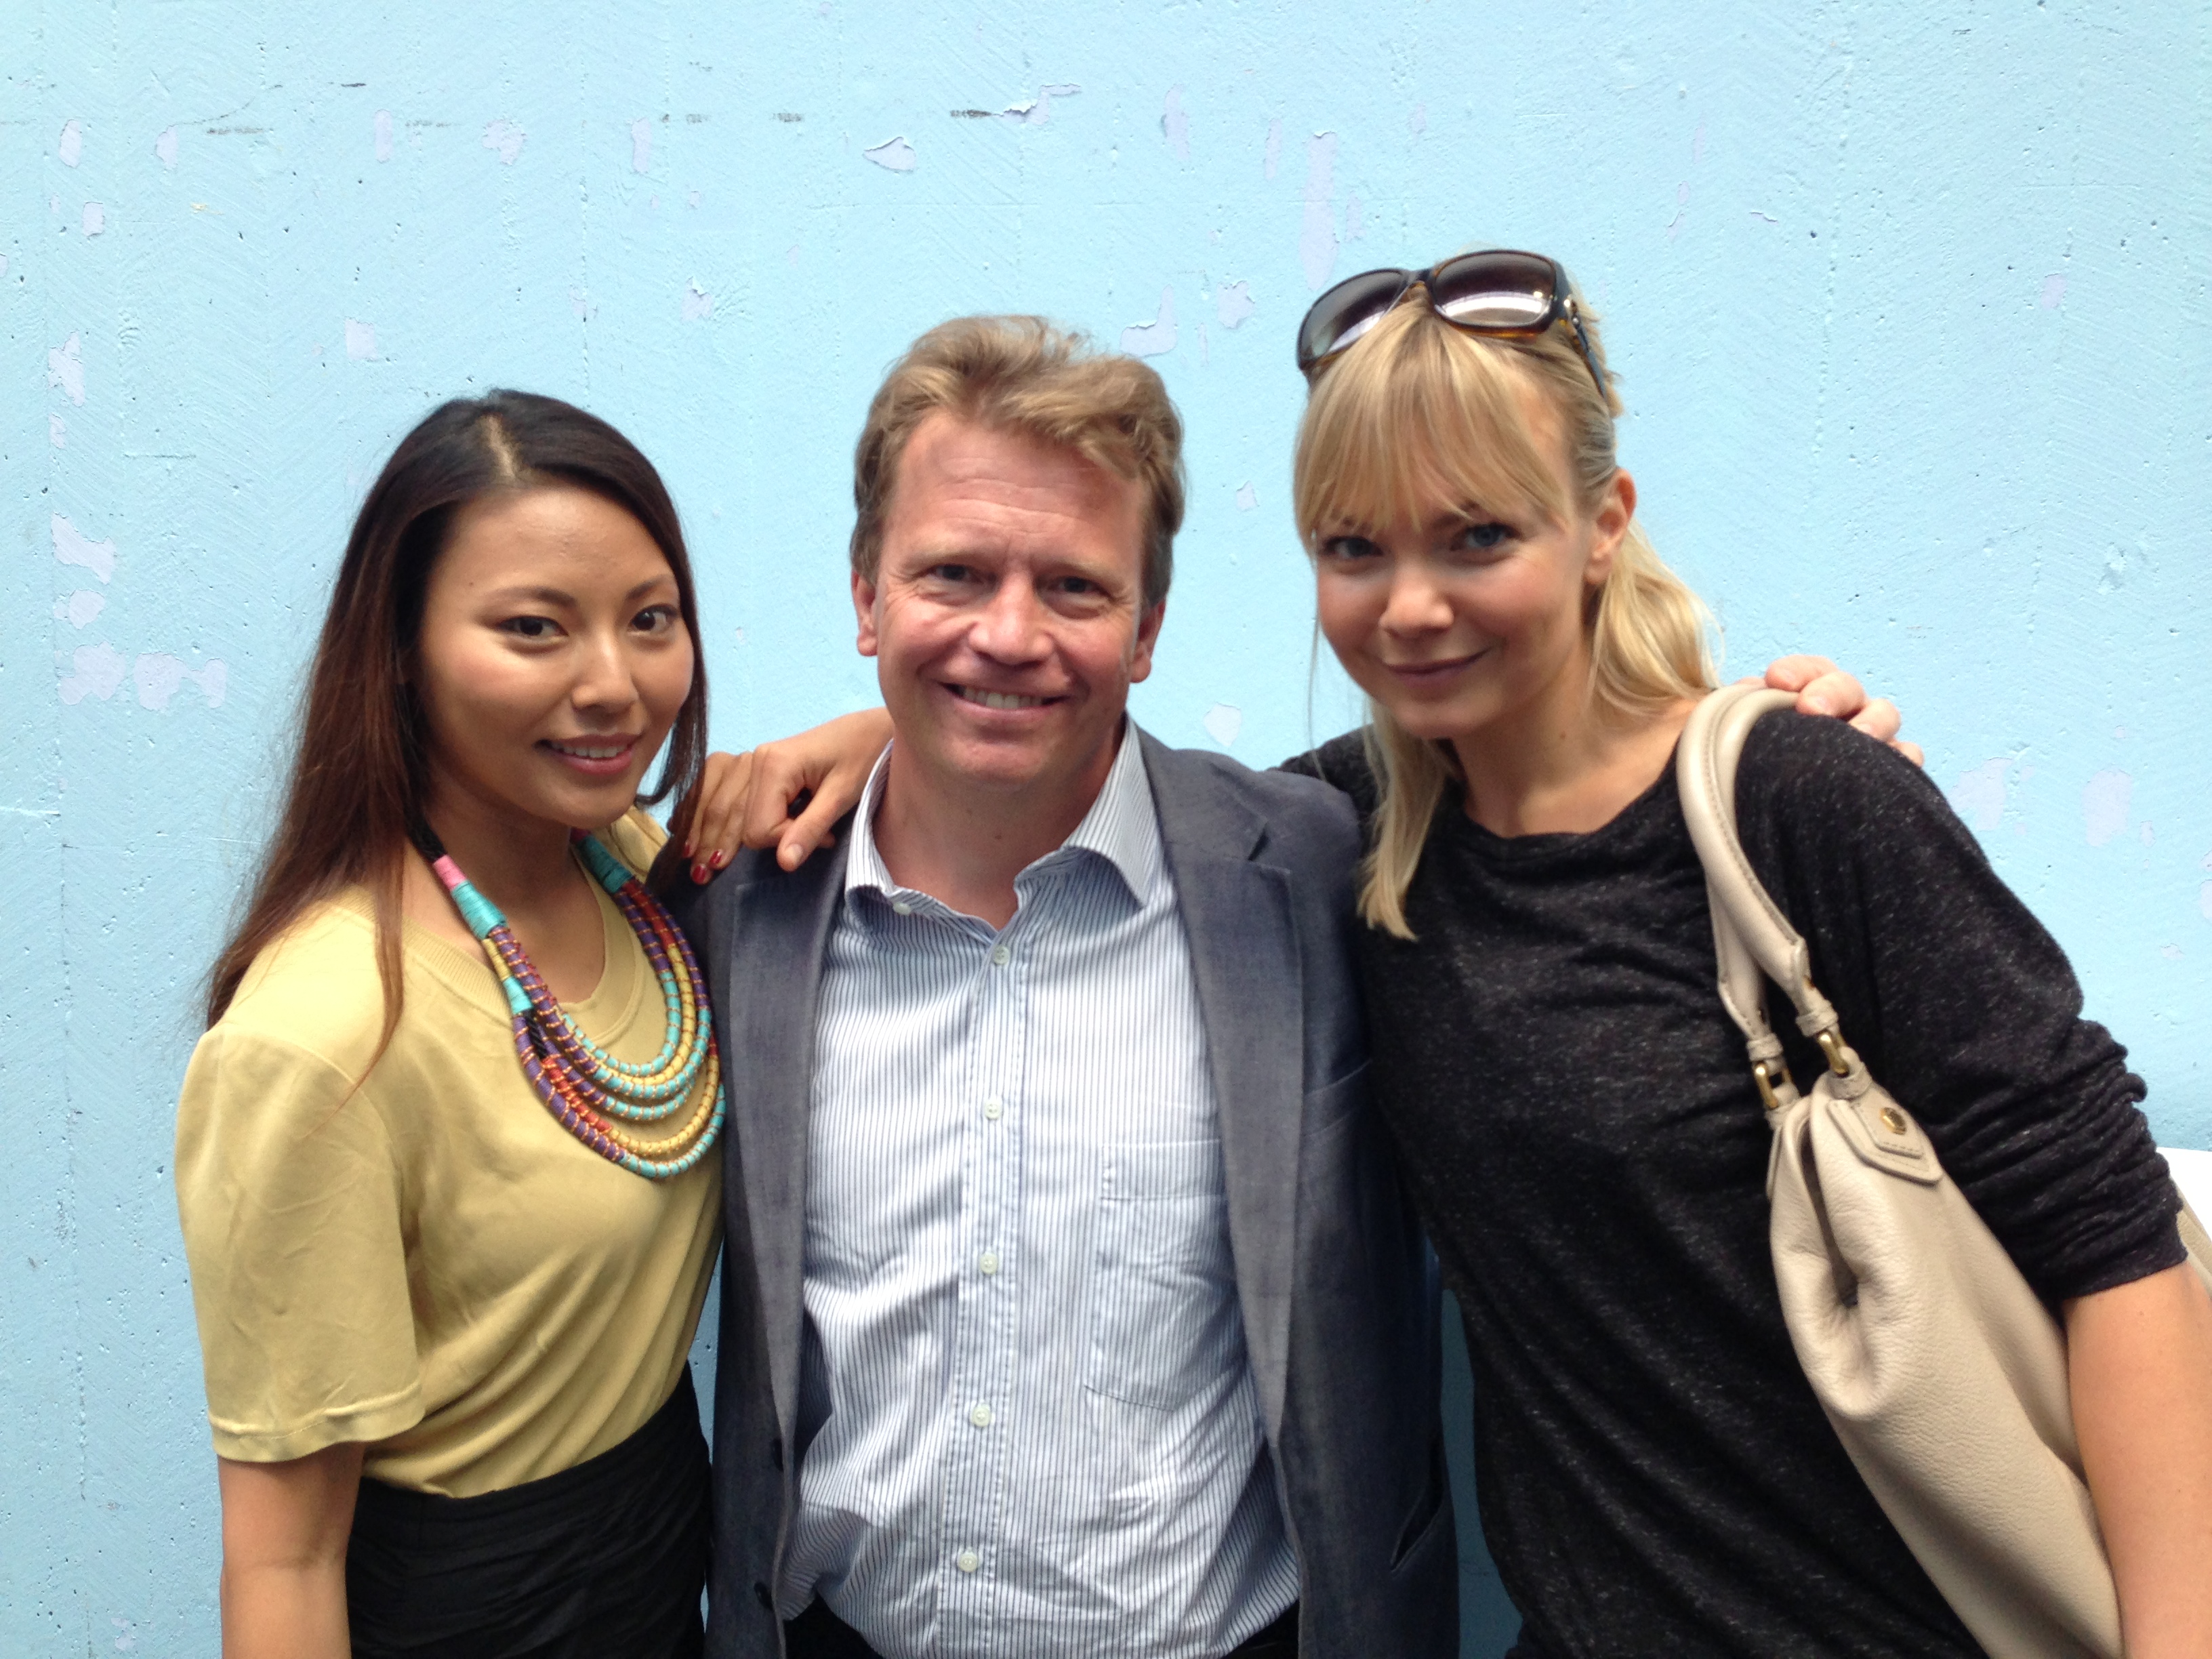 Director Harald Hamrell with actresses Lisette Pagler and Marie Robertsson, press conference for Real Humans, season 2.